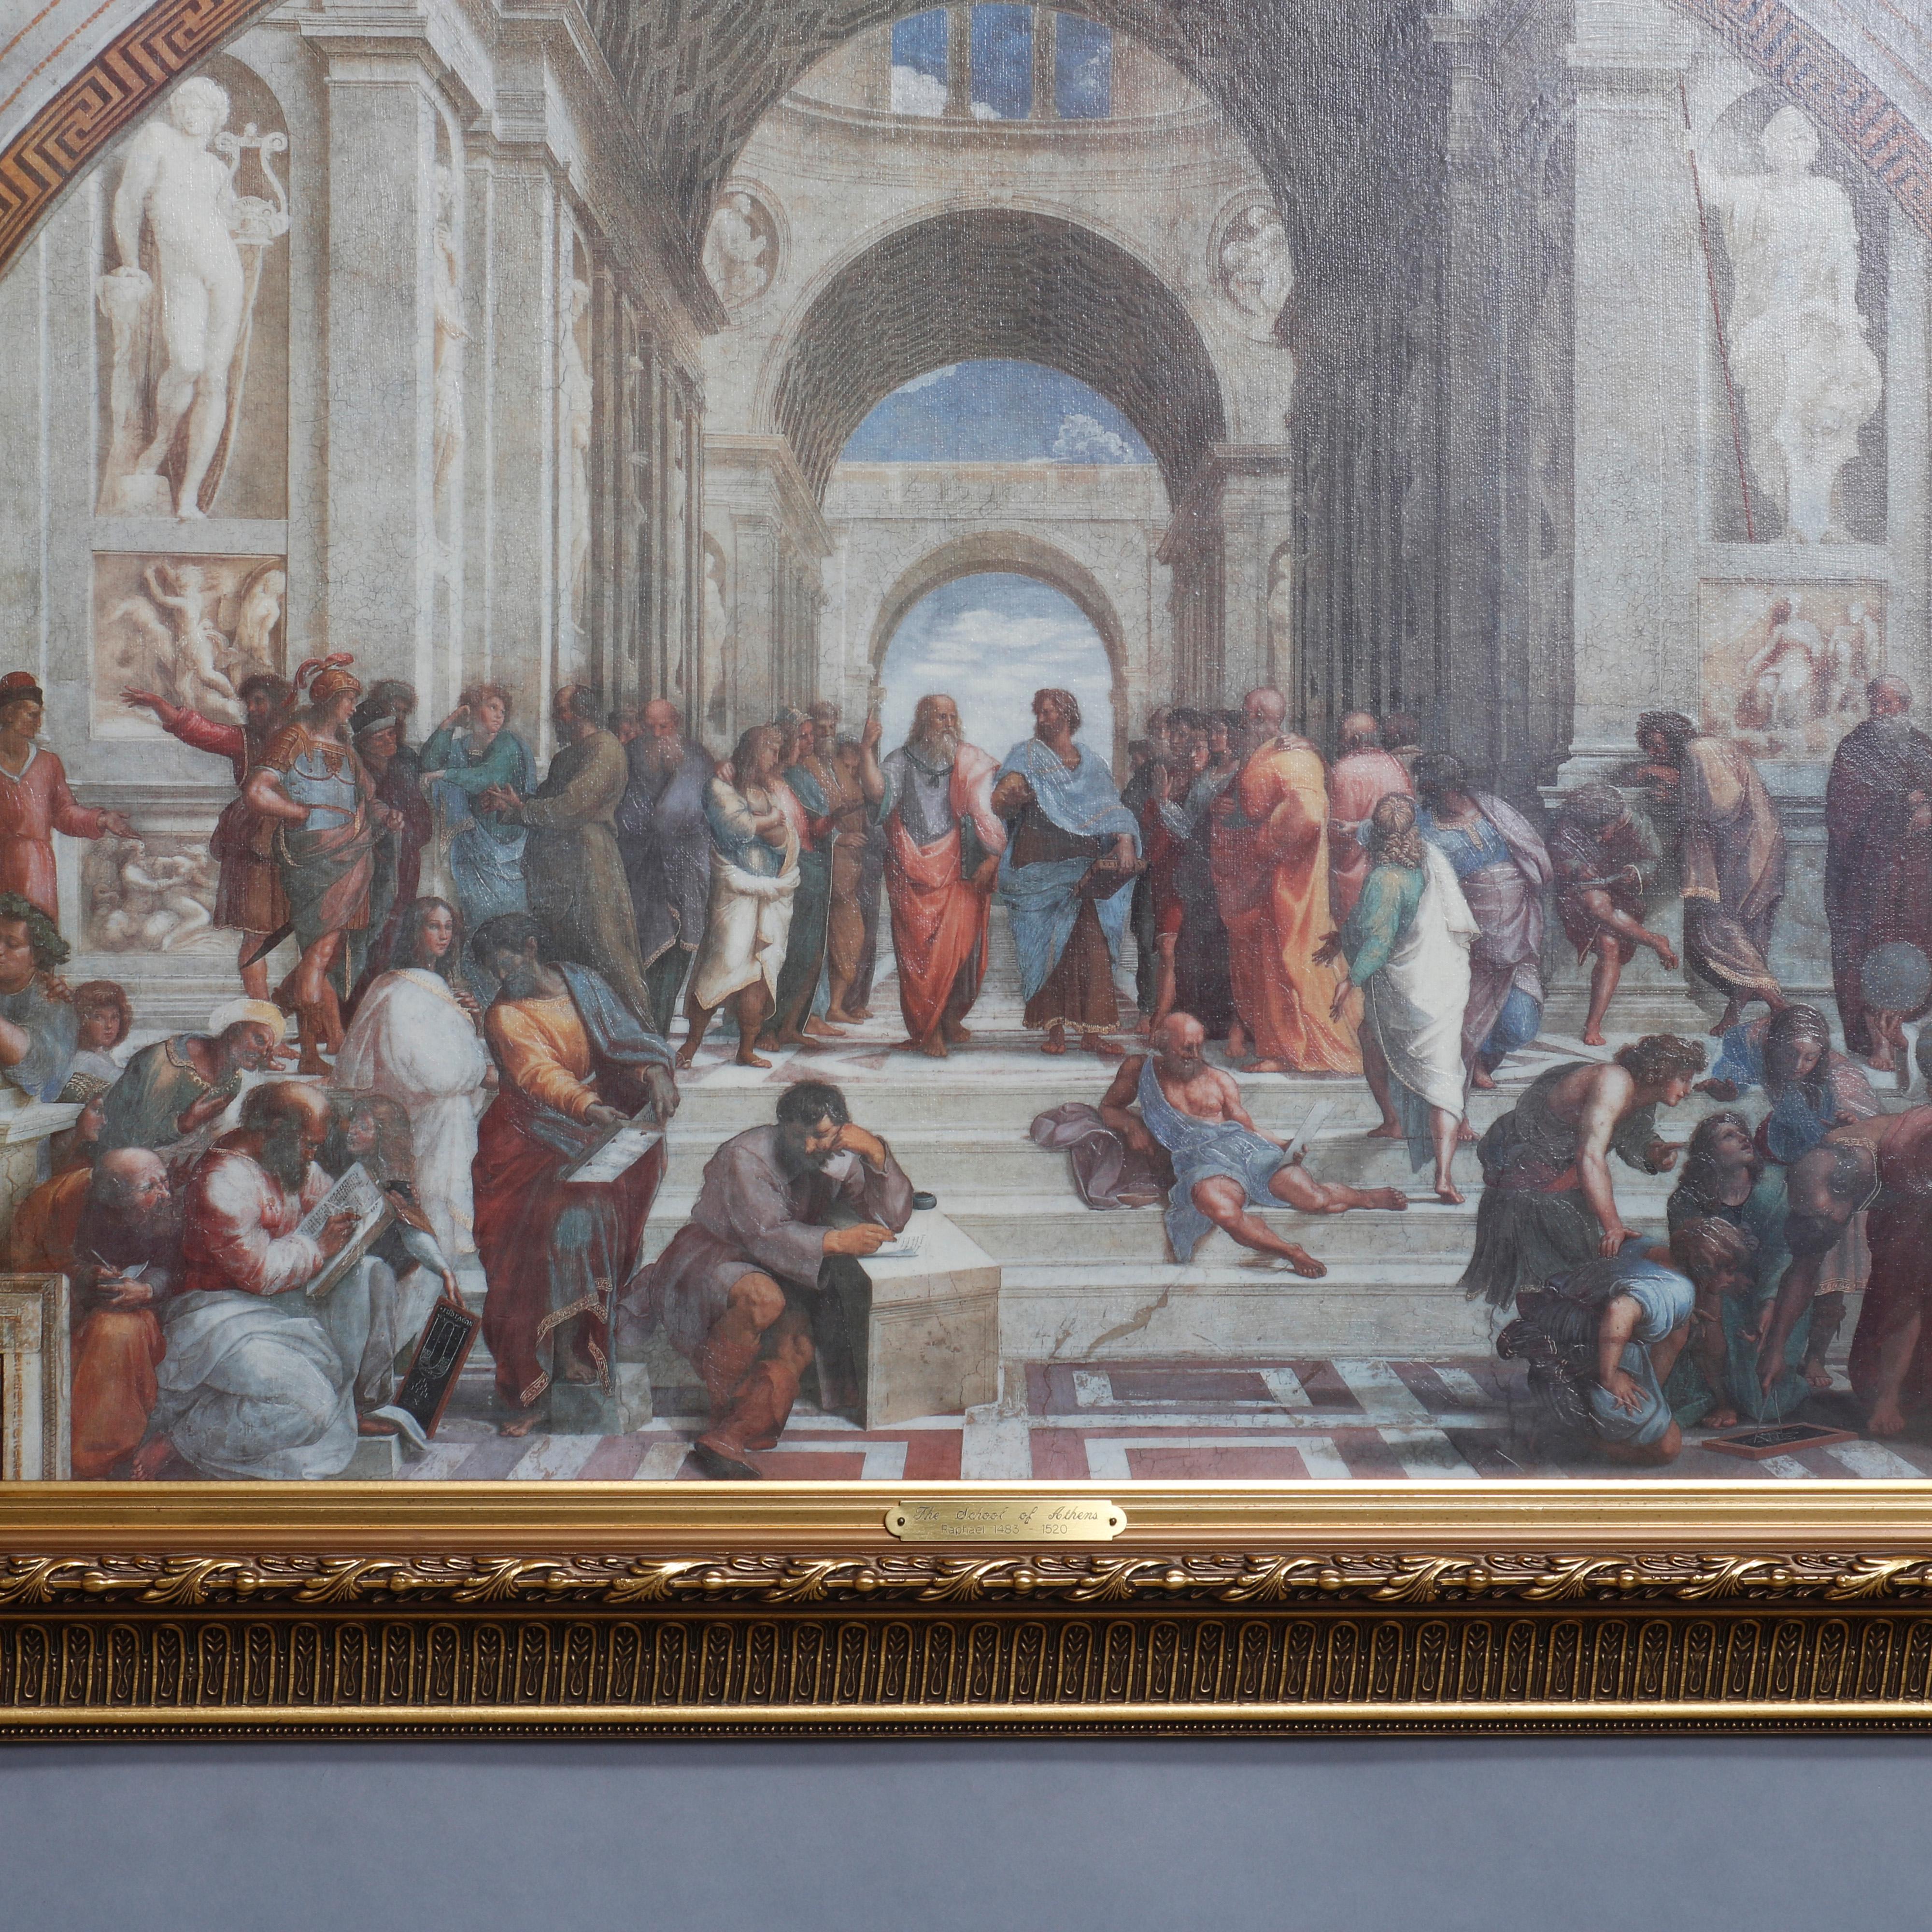 Framed Old Master Gilclee Copy of Raphael's 'The School of Athens', 20th C

Measures - 29